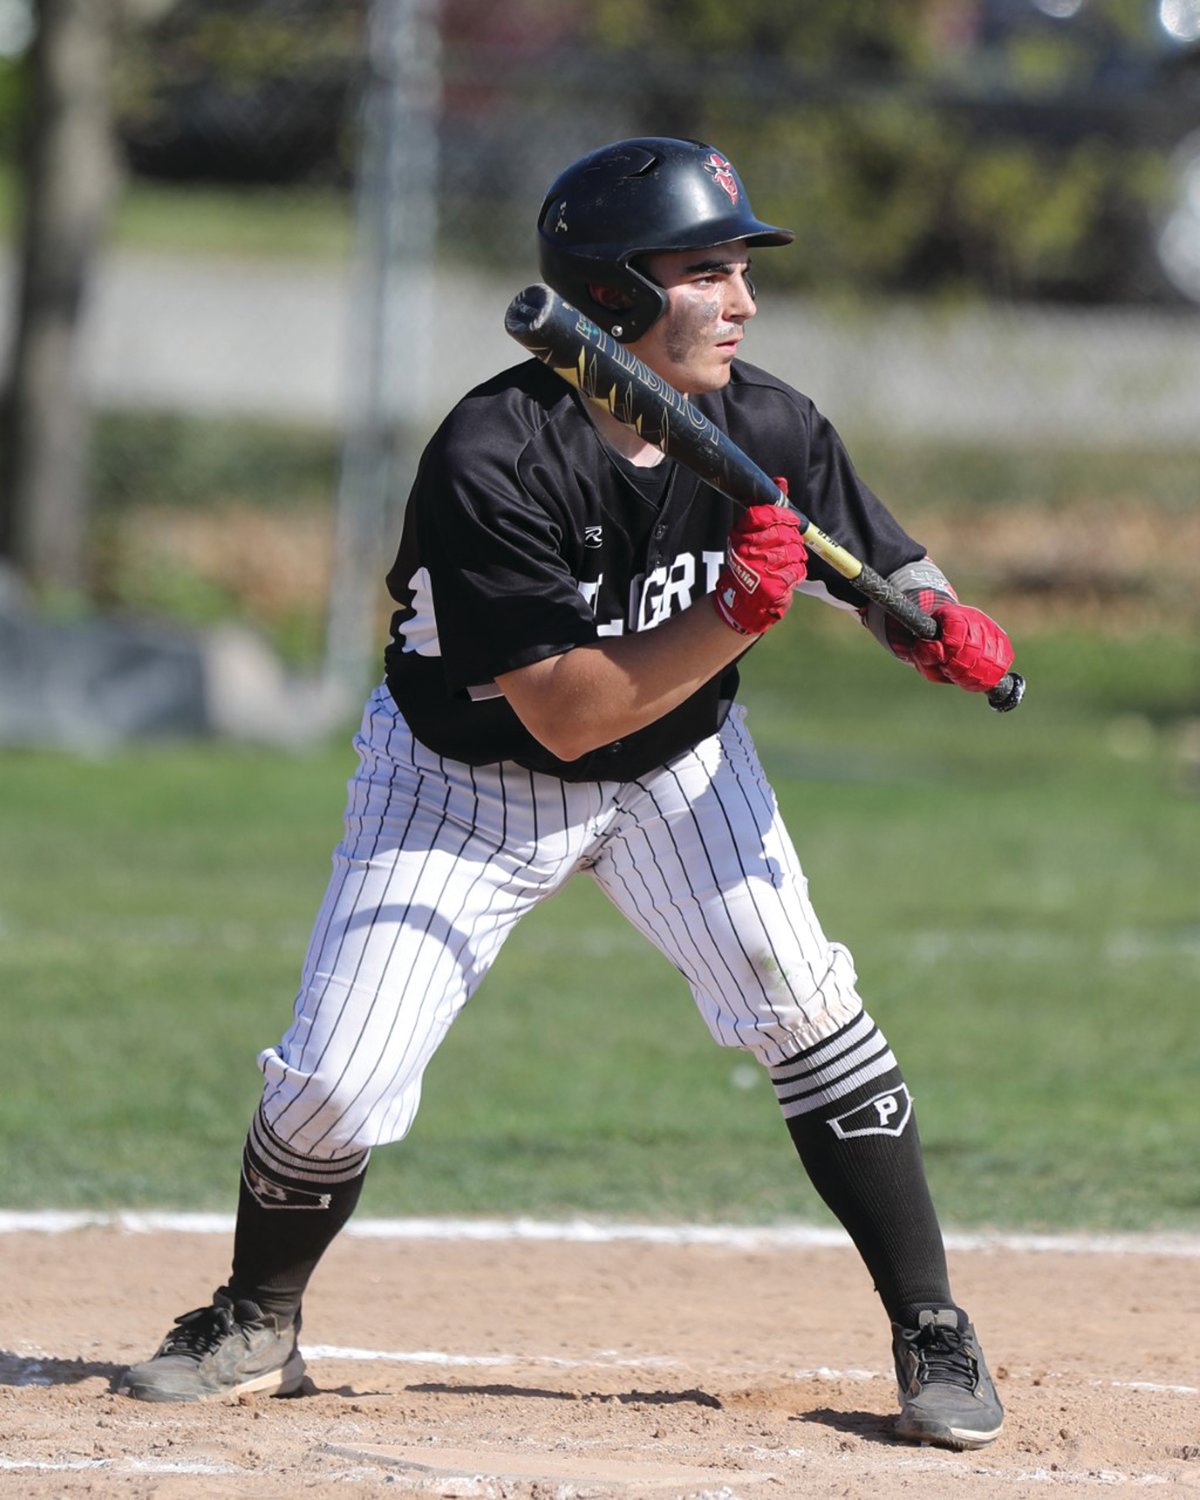 LAYING A BUNT: Pilgrim’s Dylan Roberts looks to bunt last week.